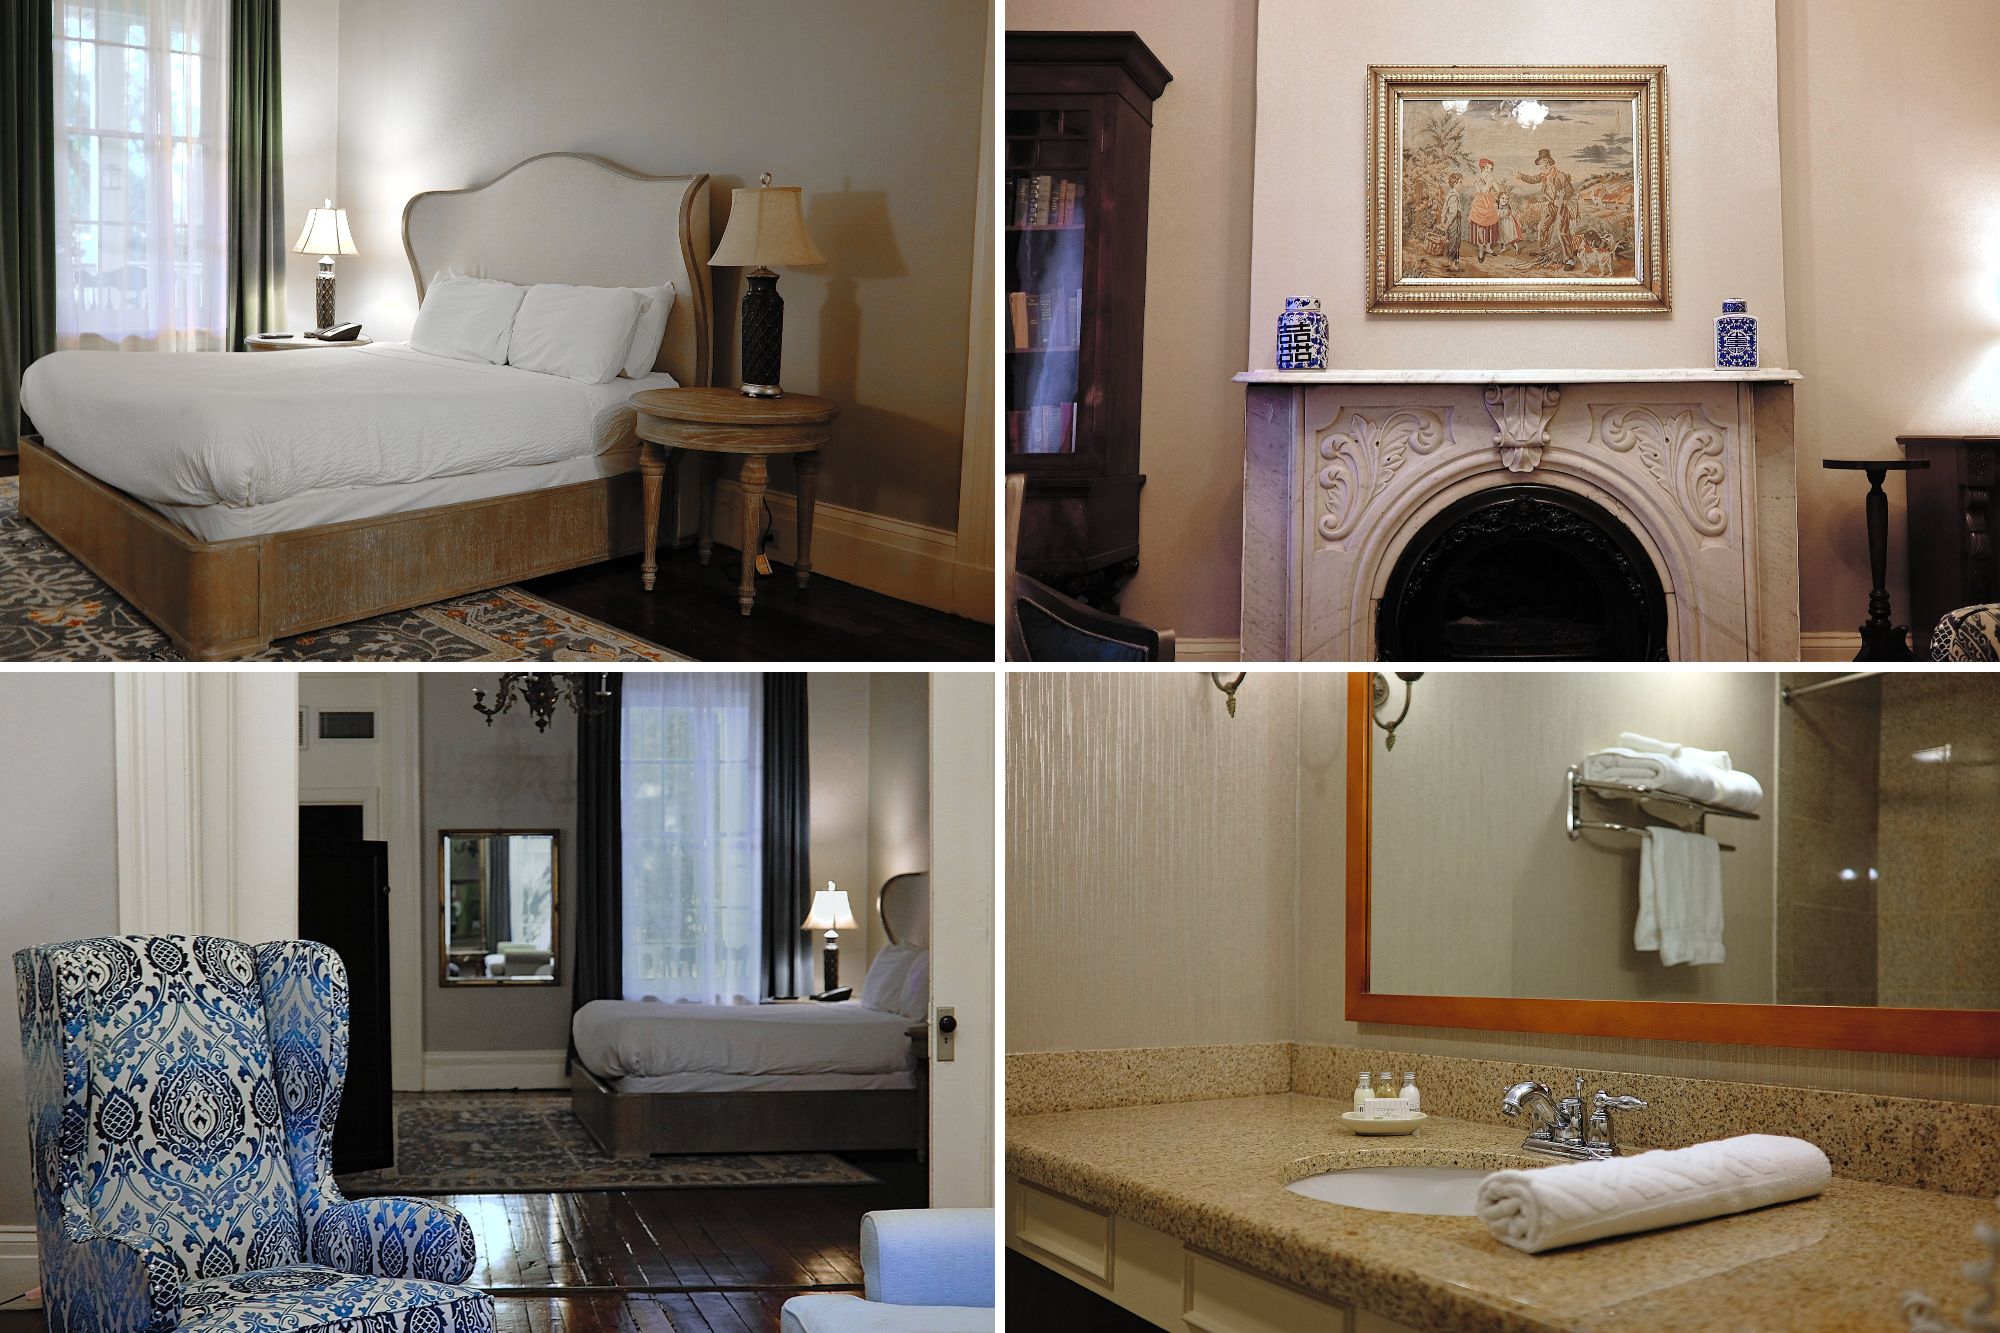 Four images of the furniture and amenities in the Parlour Suite